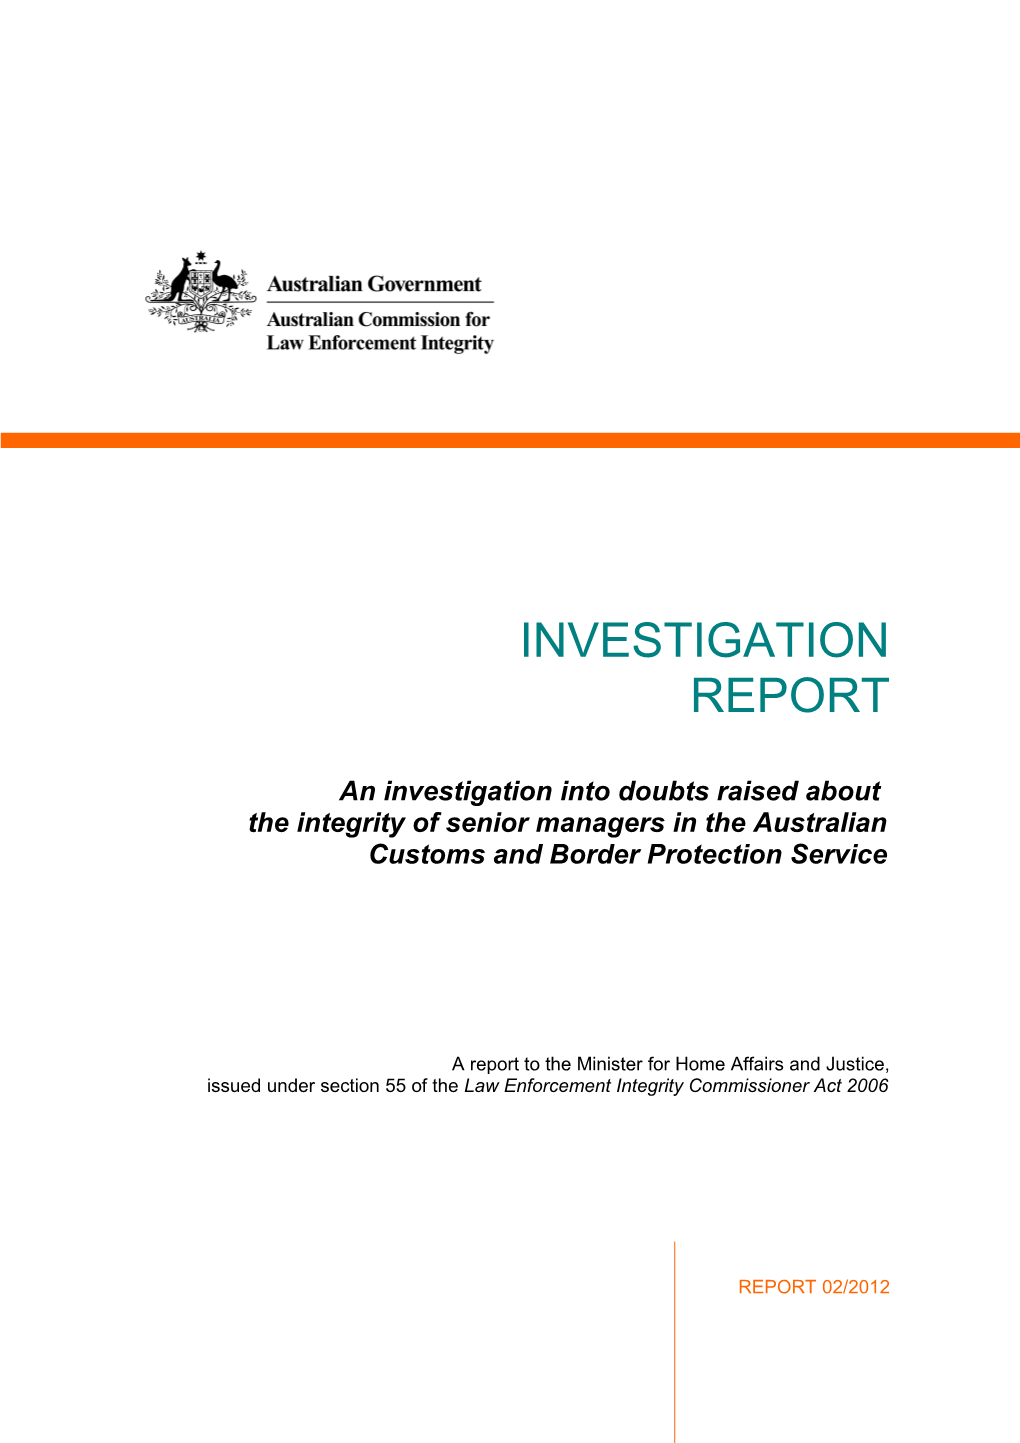 Report for the Purpose of Section 54 of the Law Enforcement Integrity Commissioner Act